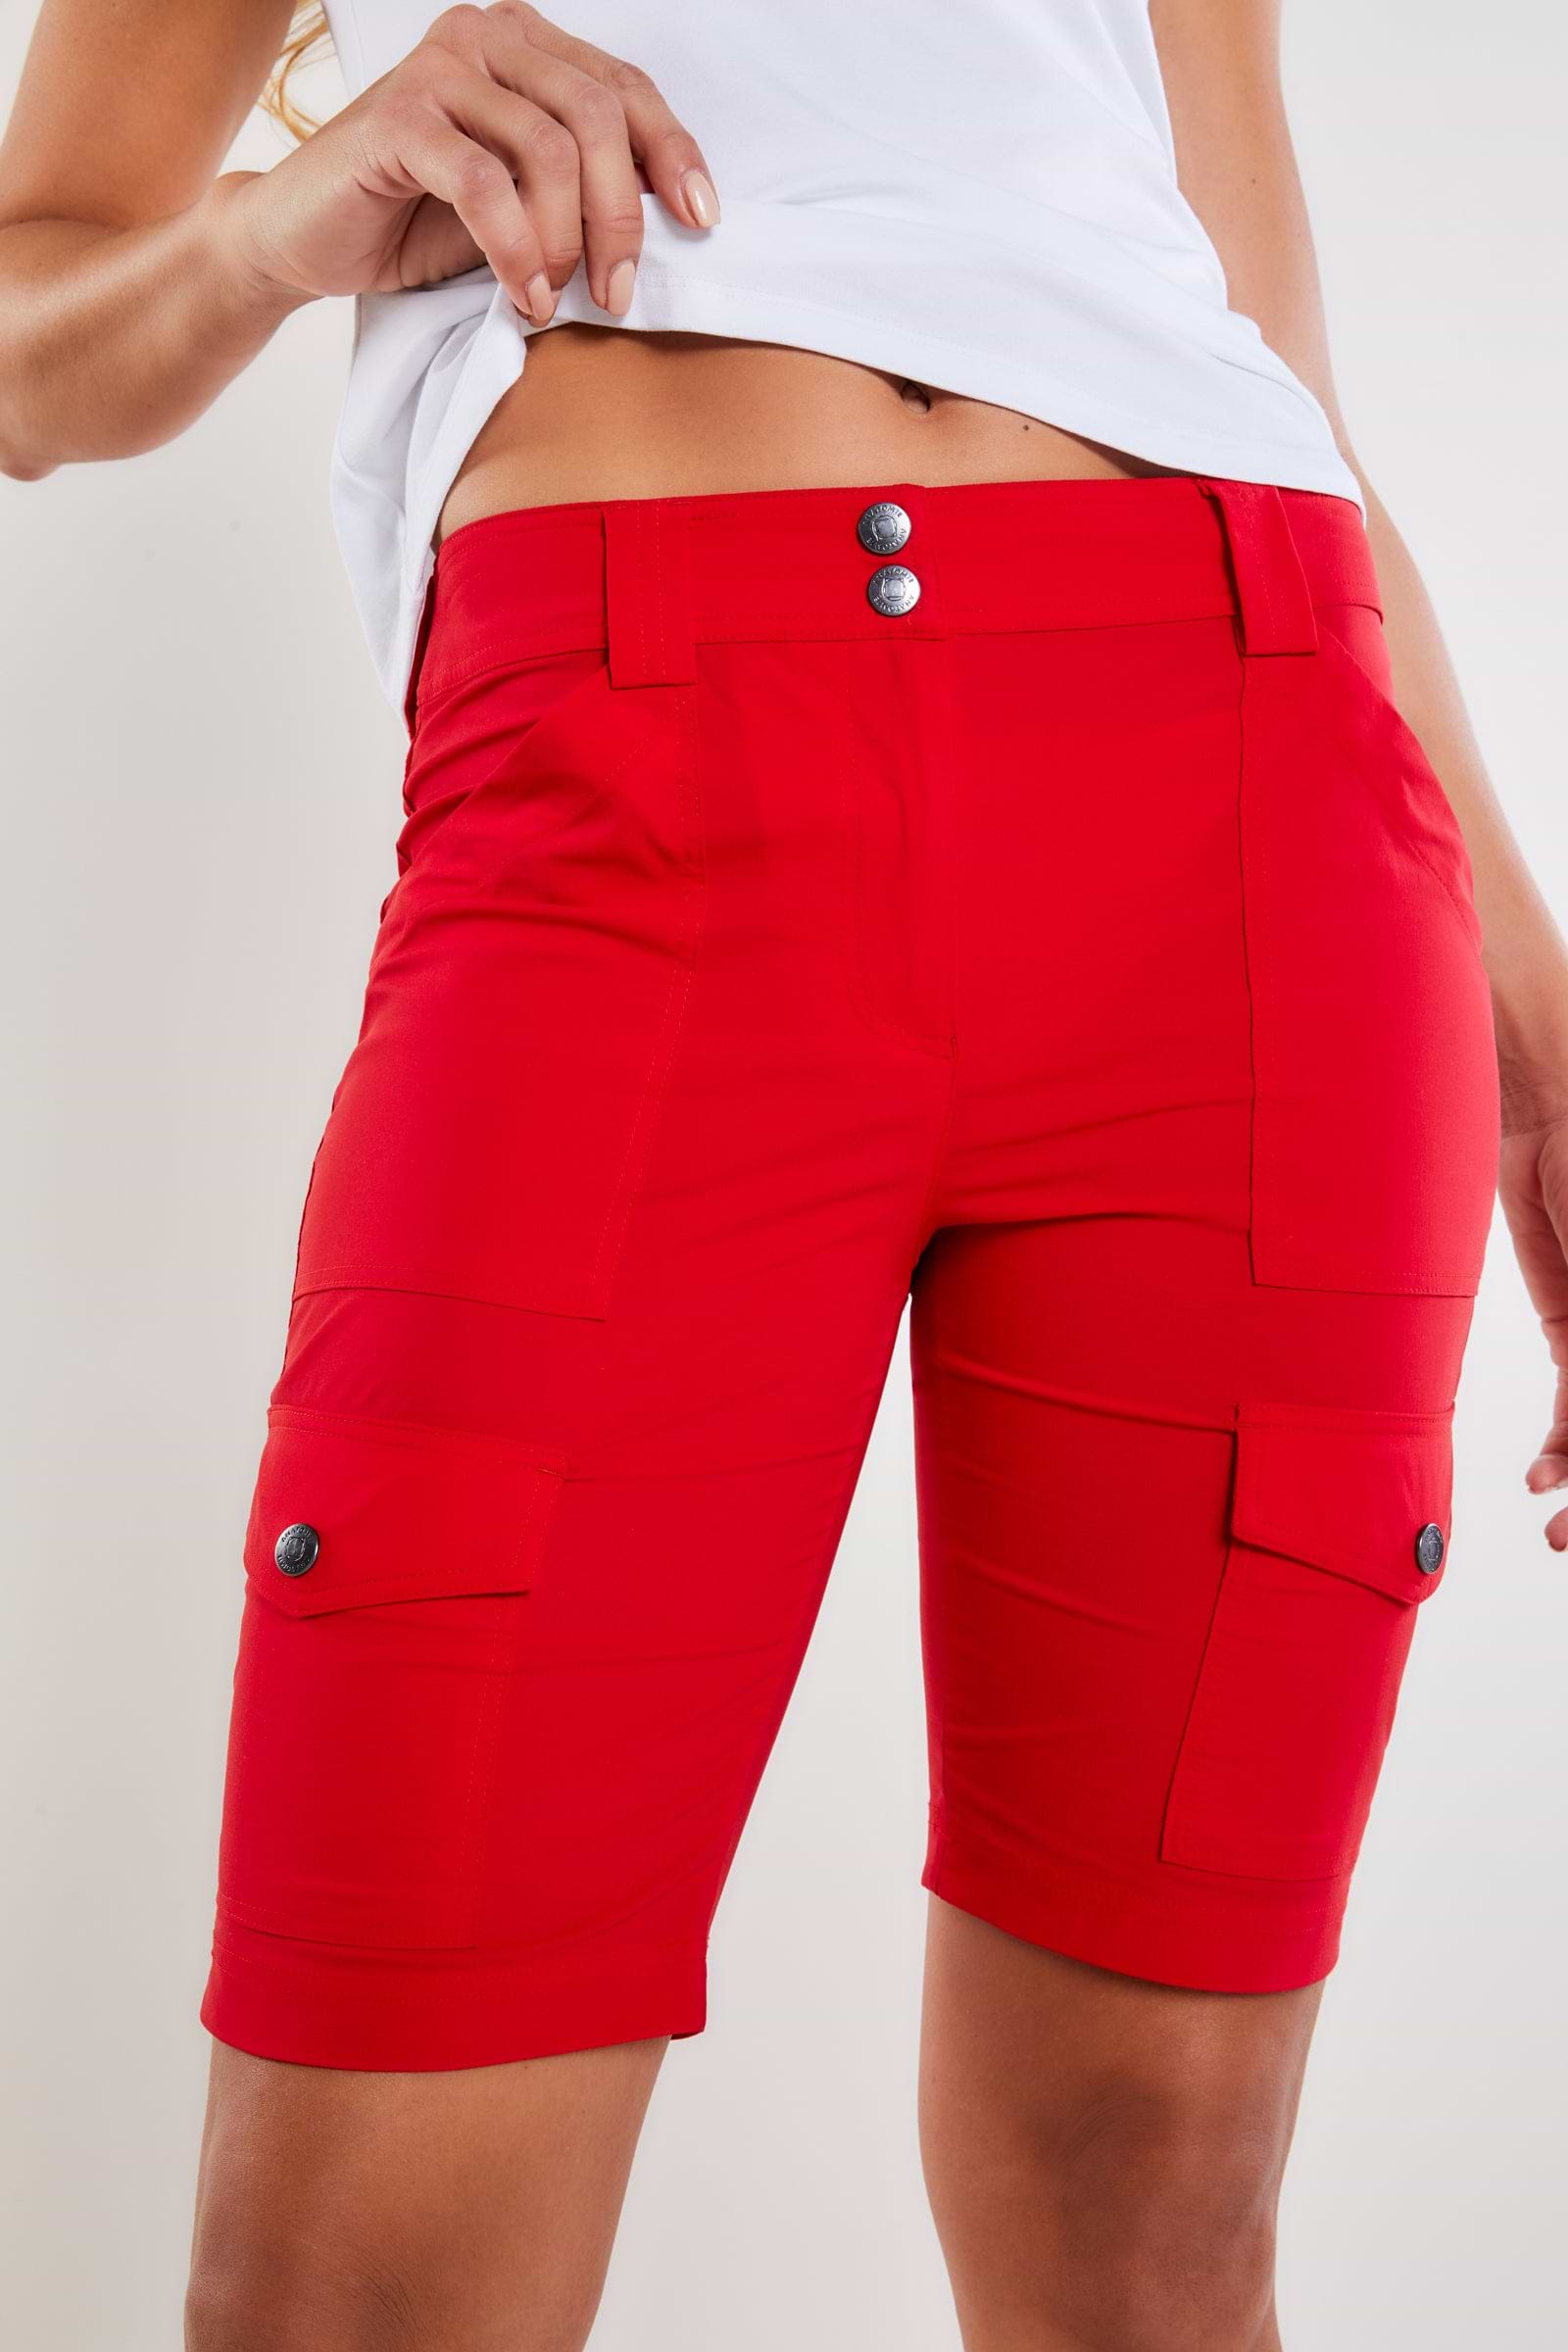 The Best Travel Shorts. Woman Showing the Front Profile of an Apiedi Shorts in Atomic Red.